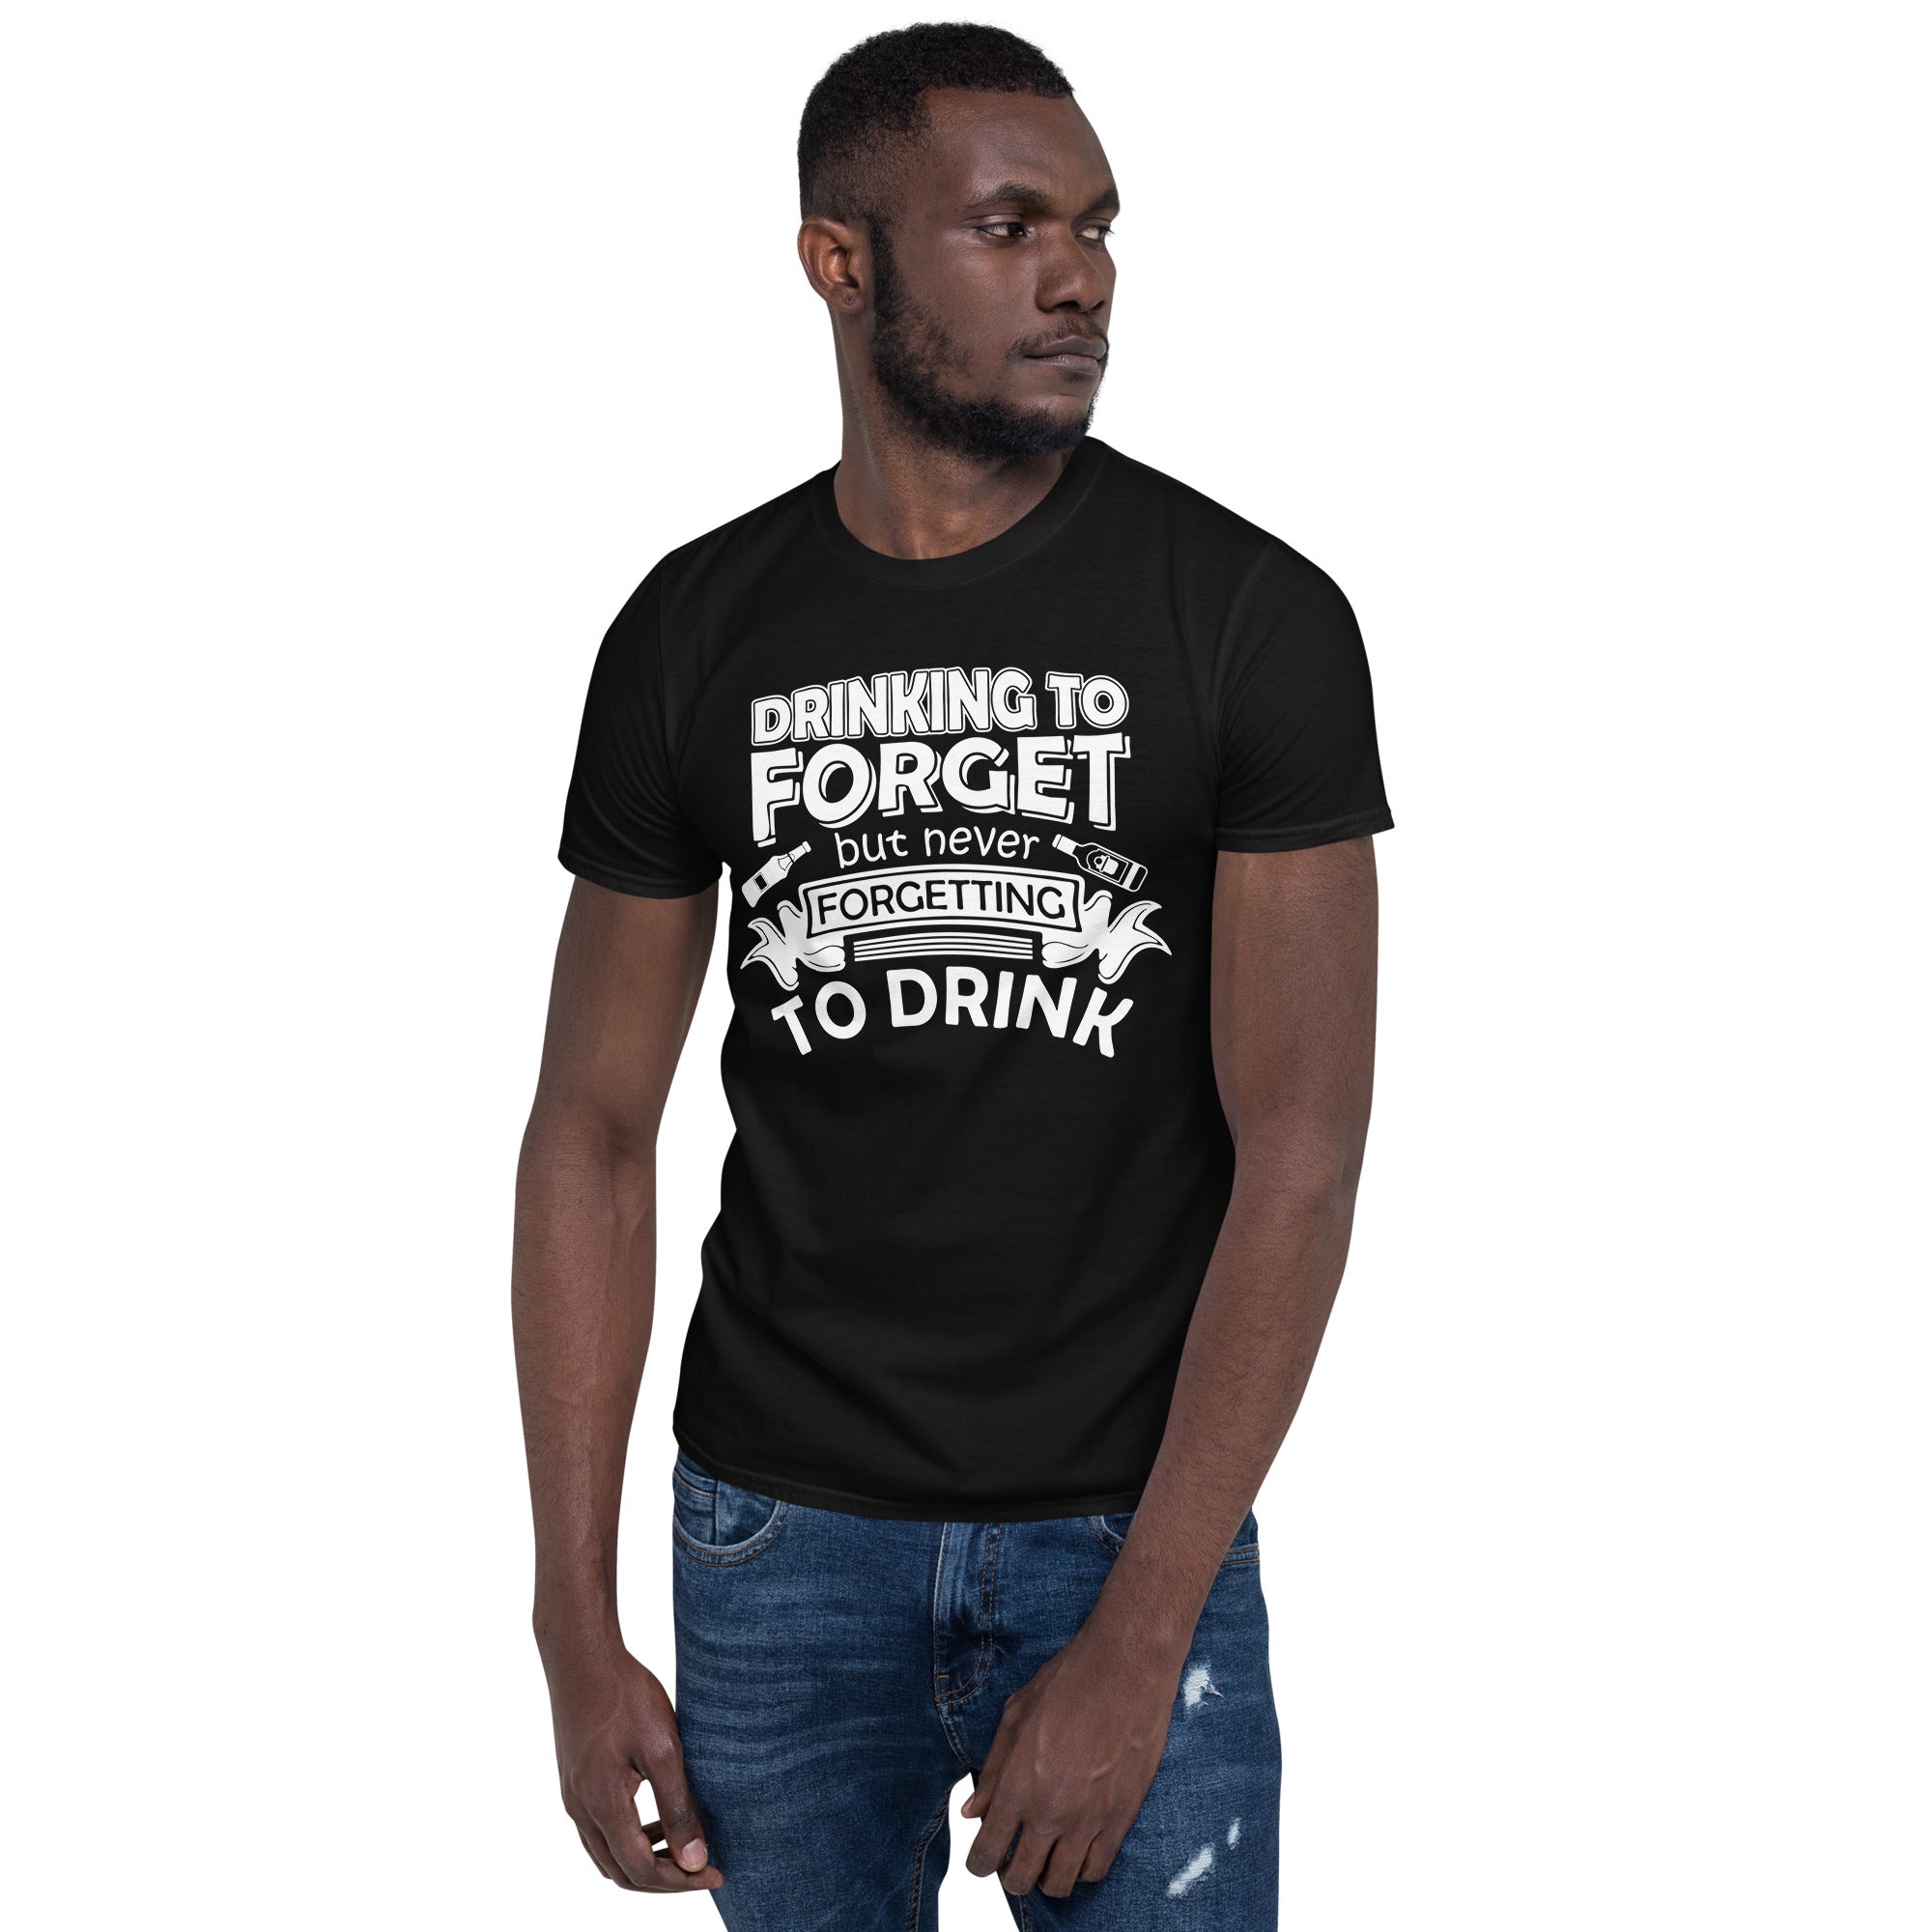 Drinking To Forget - Short-Sleeve Unisex T-Shirt